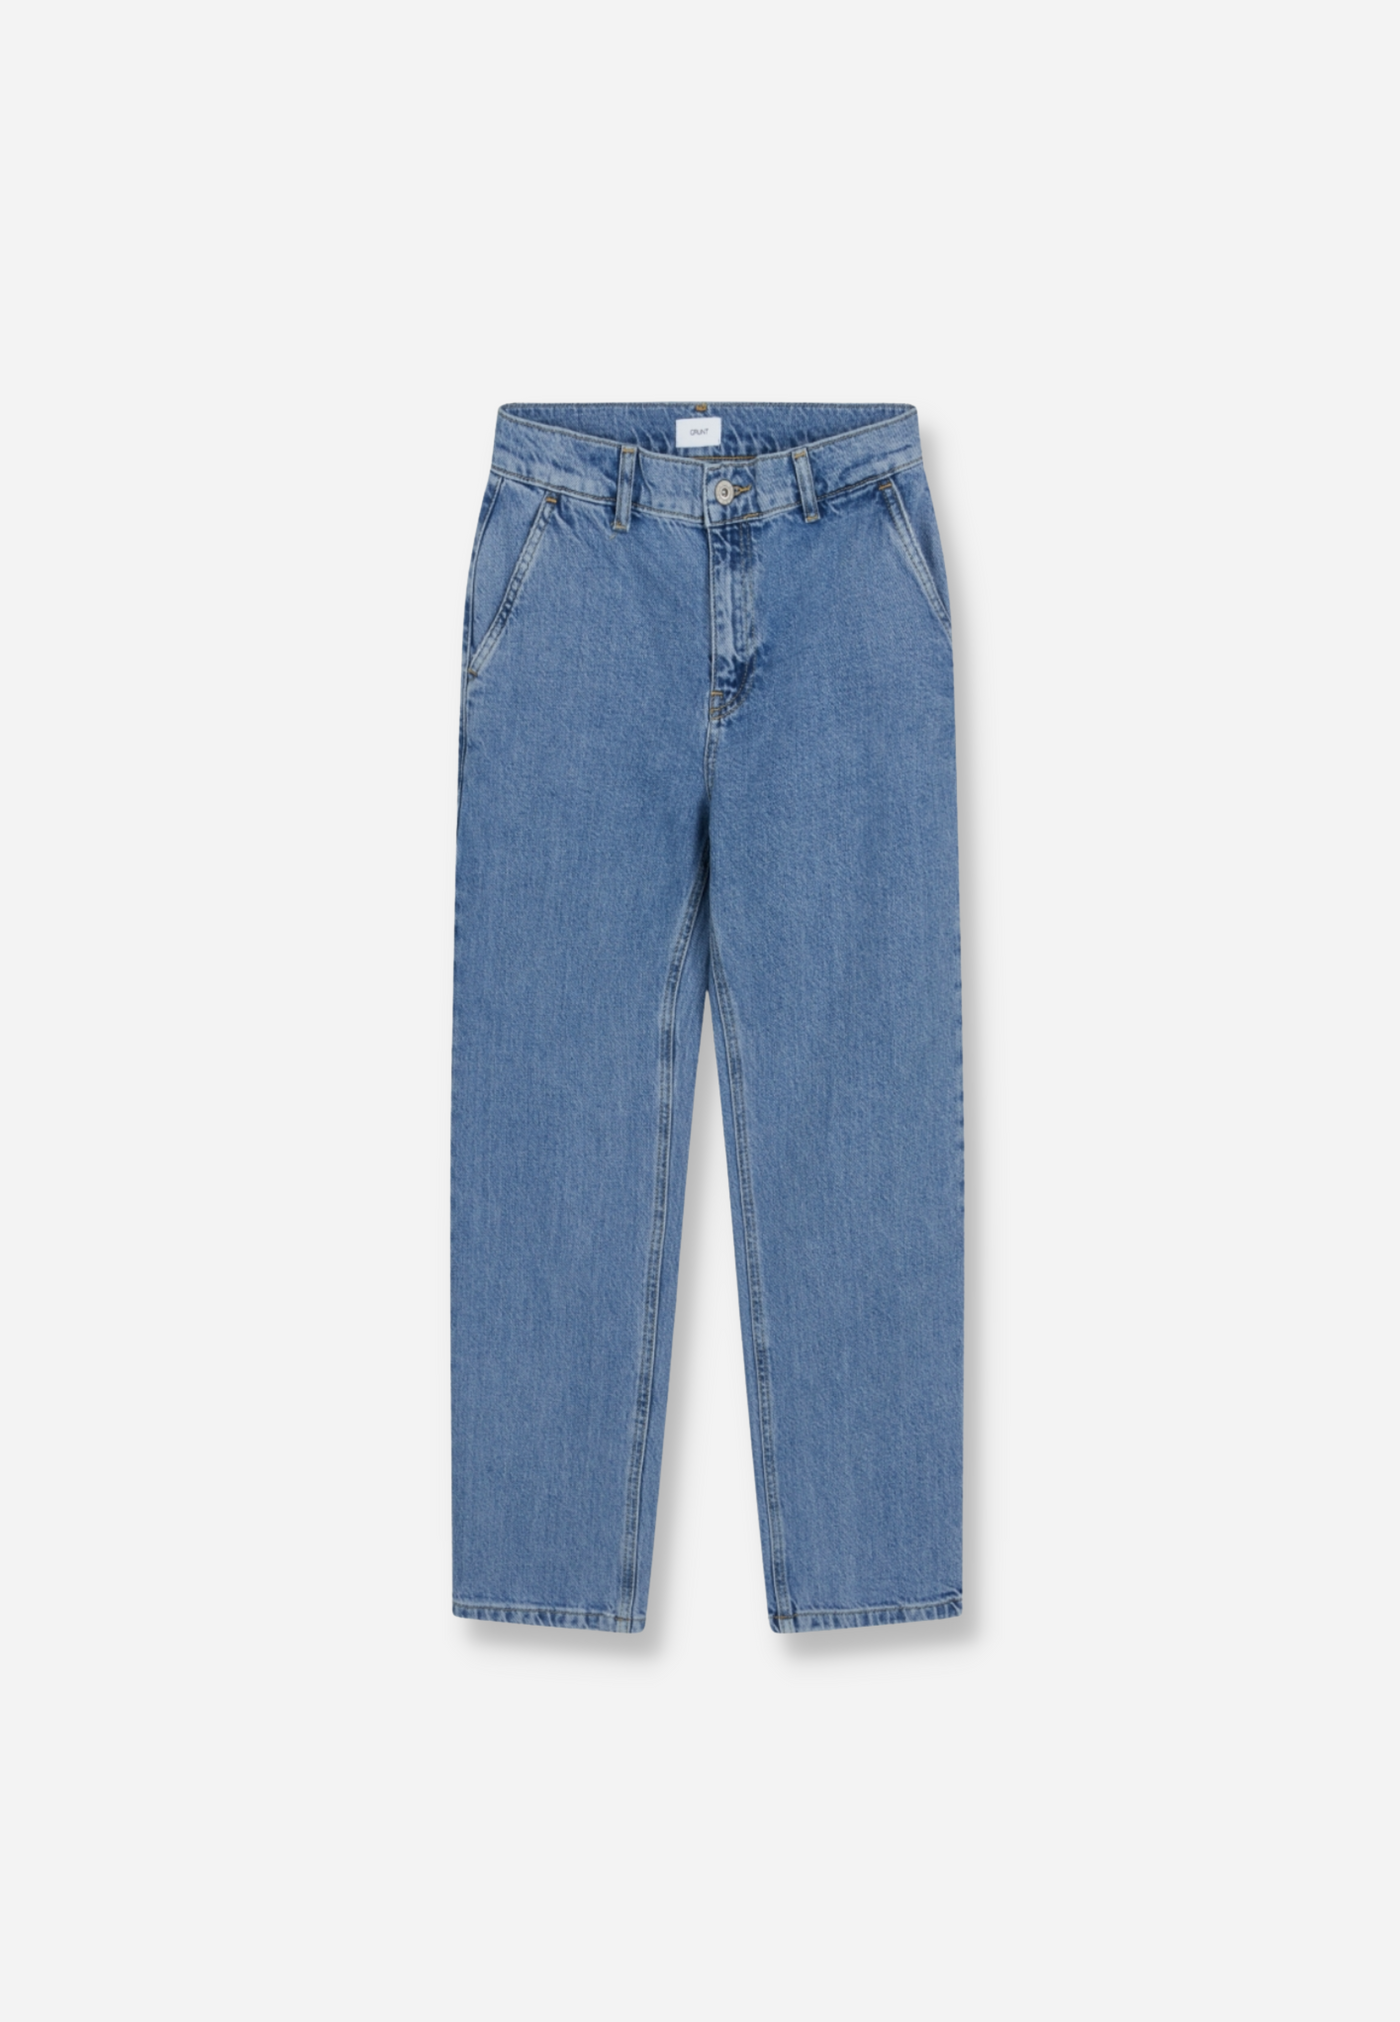 ACE MID BLUE JEANS - MID BLUE